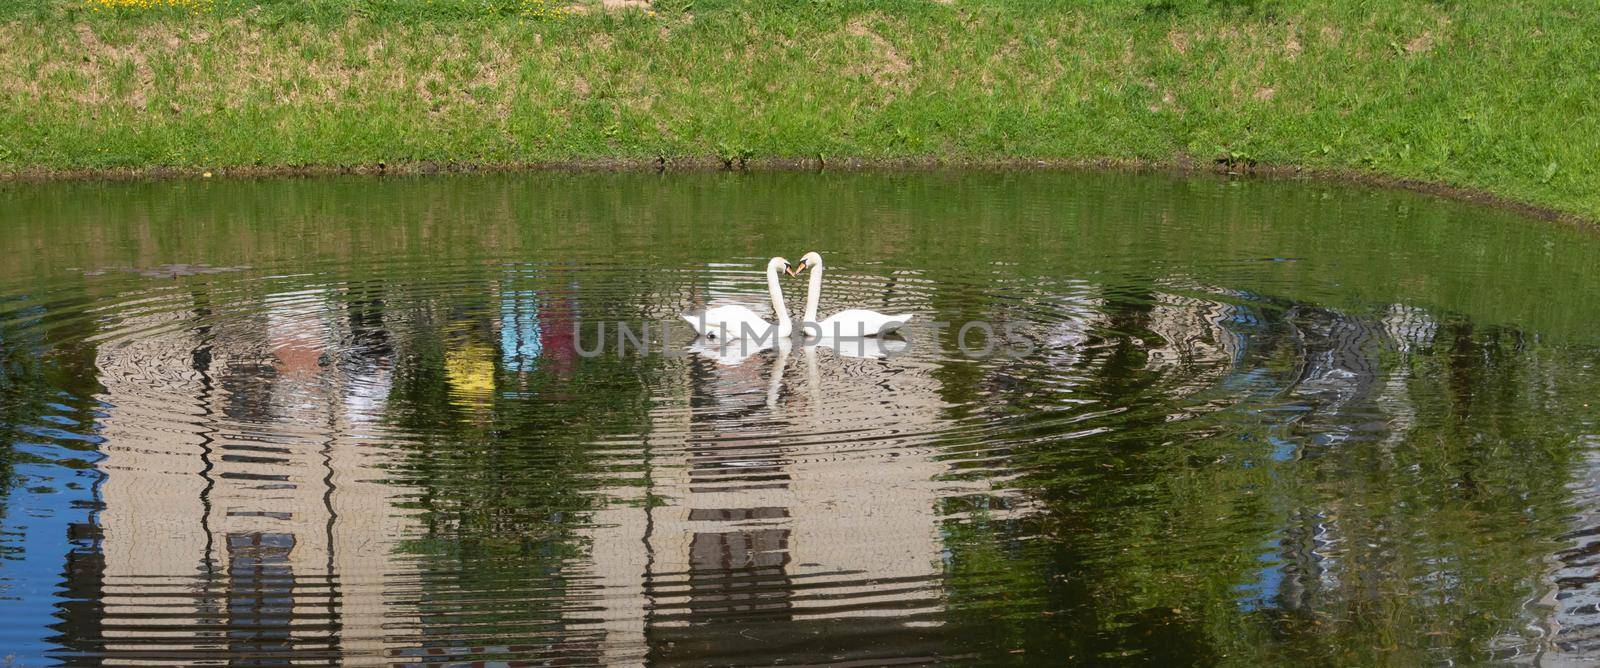 On the city pond, floating swans arched their necks in the shape of hearts.